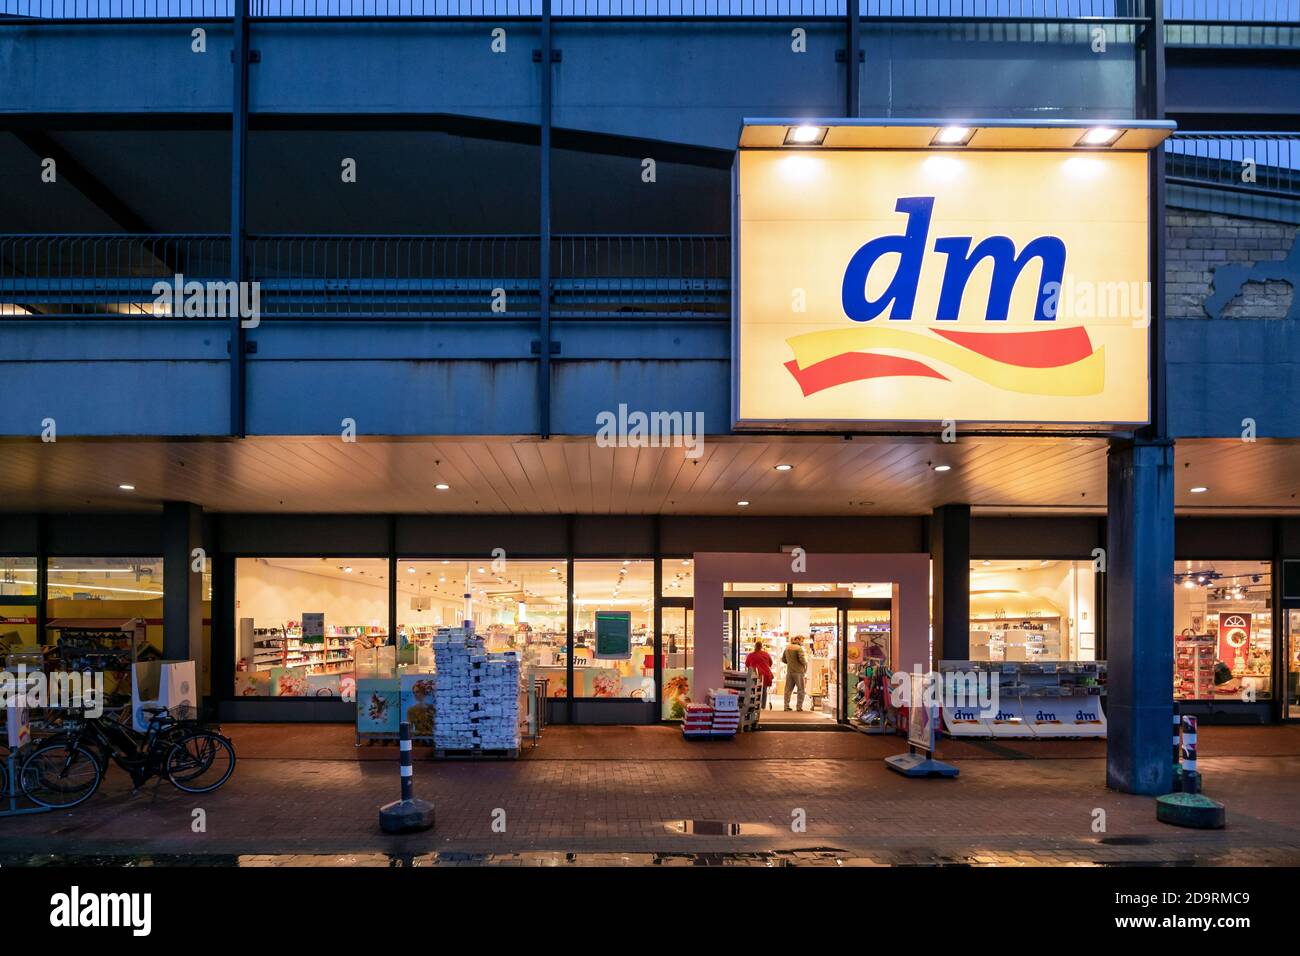 dm branch in Cuxhaven, Germany Stock Photo